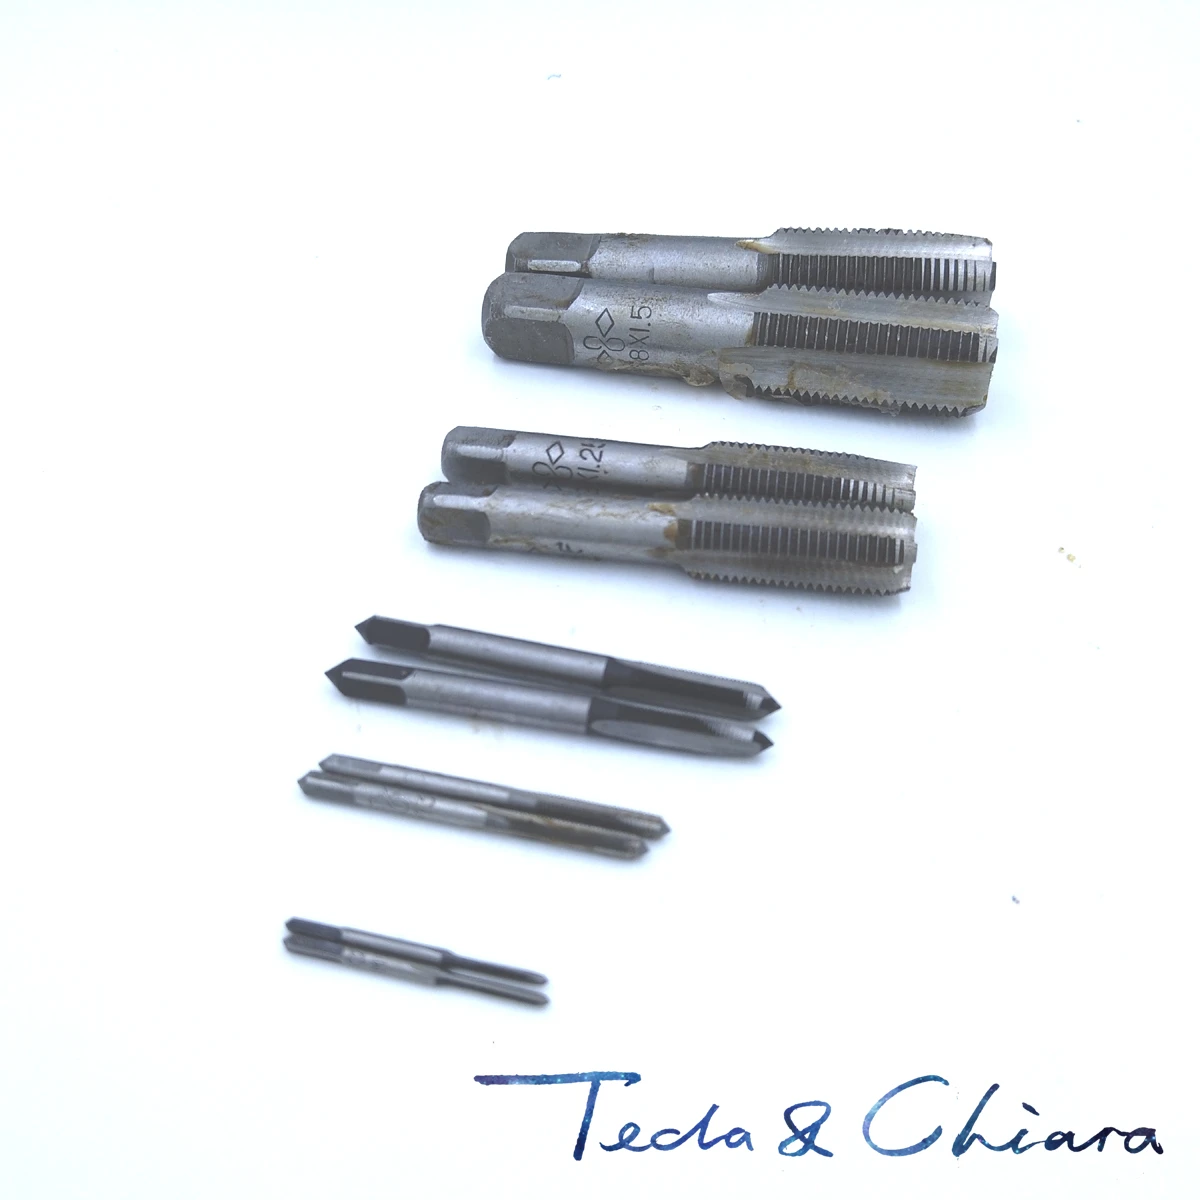 1Set M2 M2.2 M2.3 M2.5 M2.6 x 0.4mm 0.45mm Metric Taper and Plug Tap Pitch For Mold Machining * 0.4 0.45